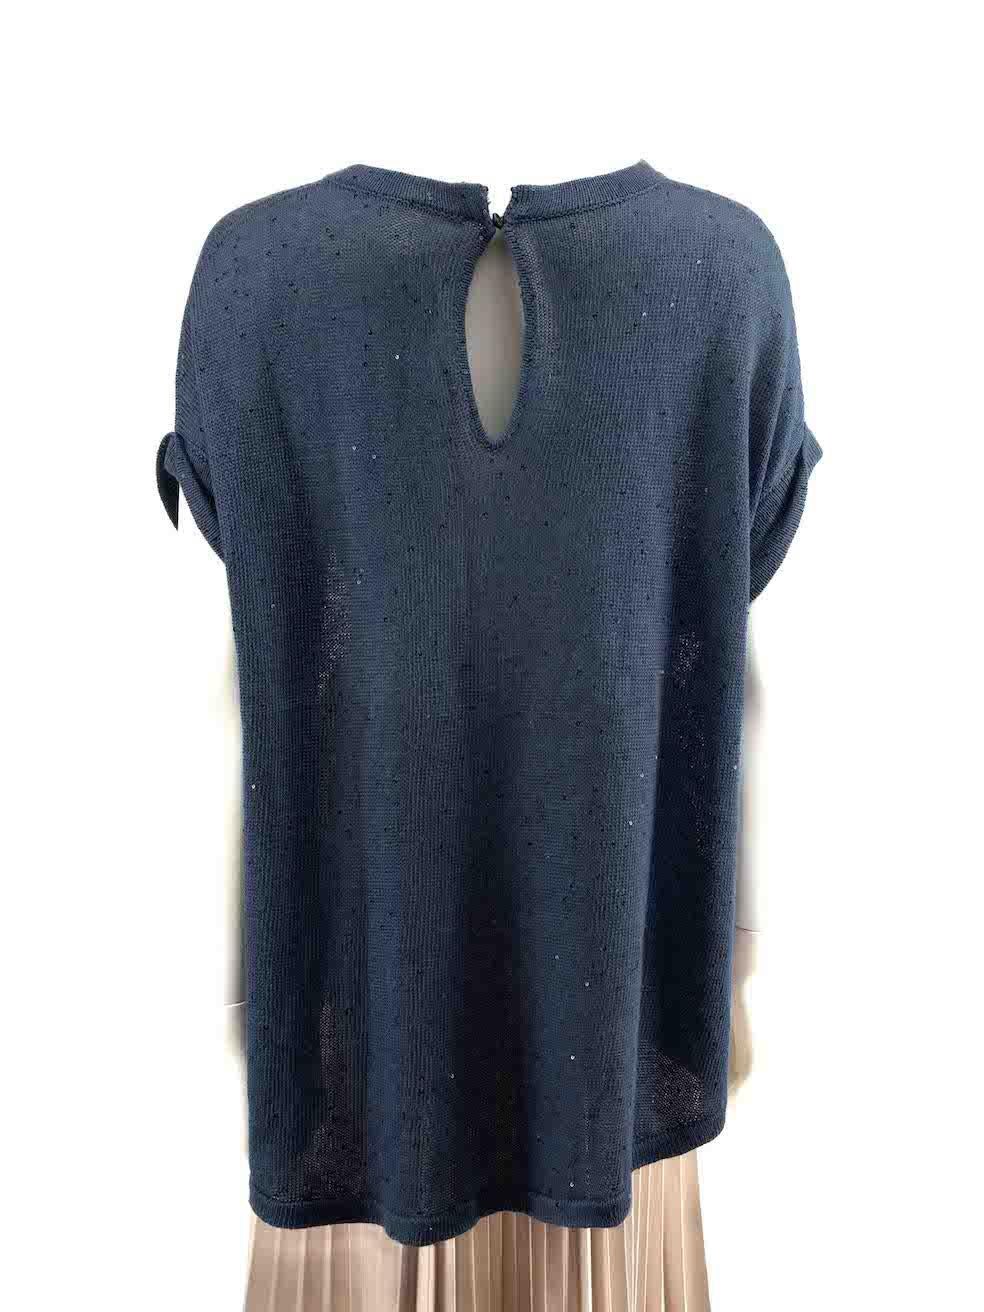 Brunello Cucinelli Blue Sequin Accent Knit Top Size S In Excellent Condition For Sale In London, GB